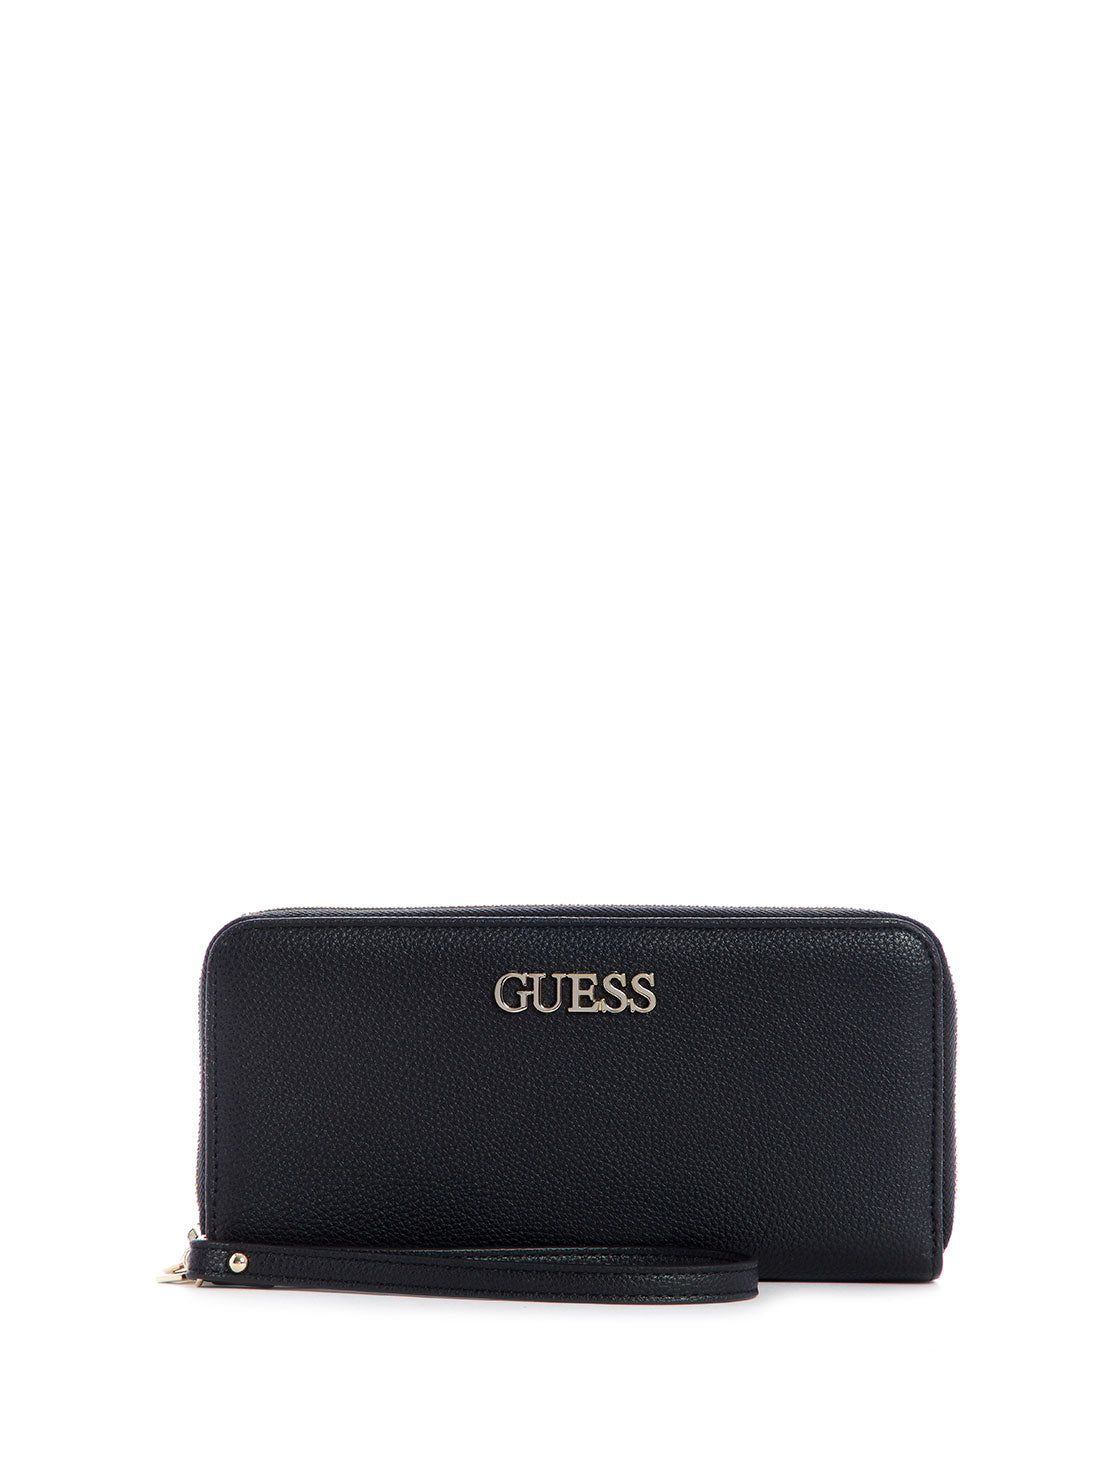 GUESS Womens Black Jardine Large Wallet VG838646 Front View